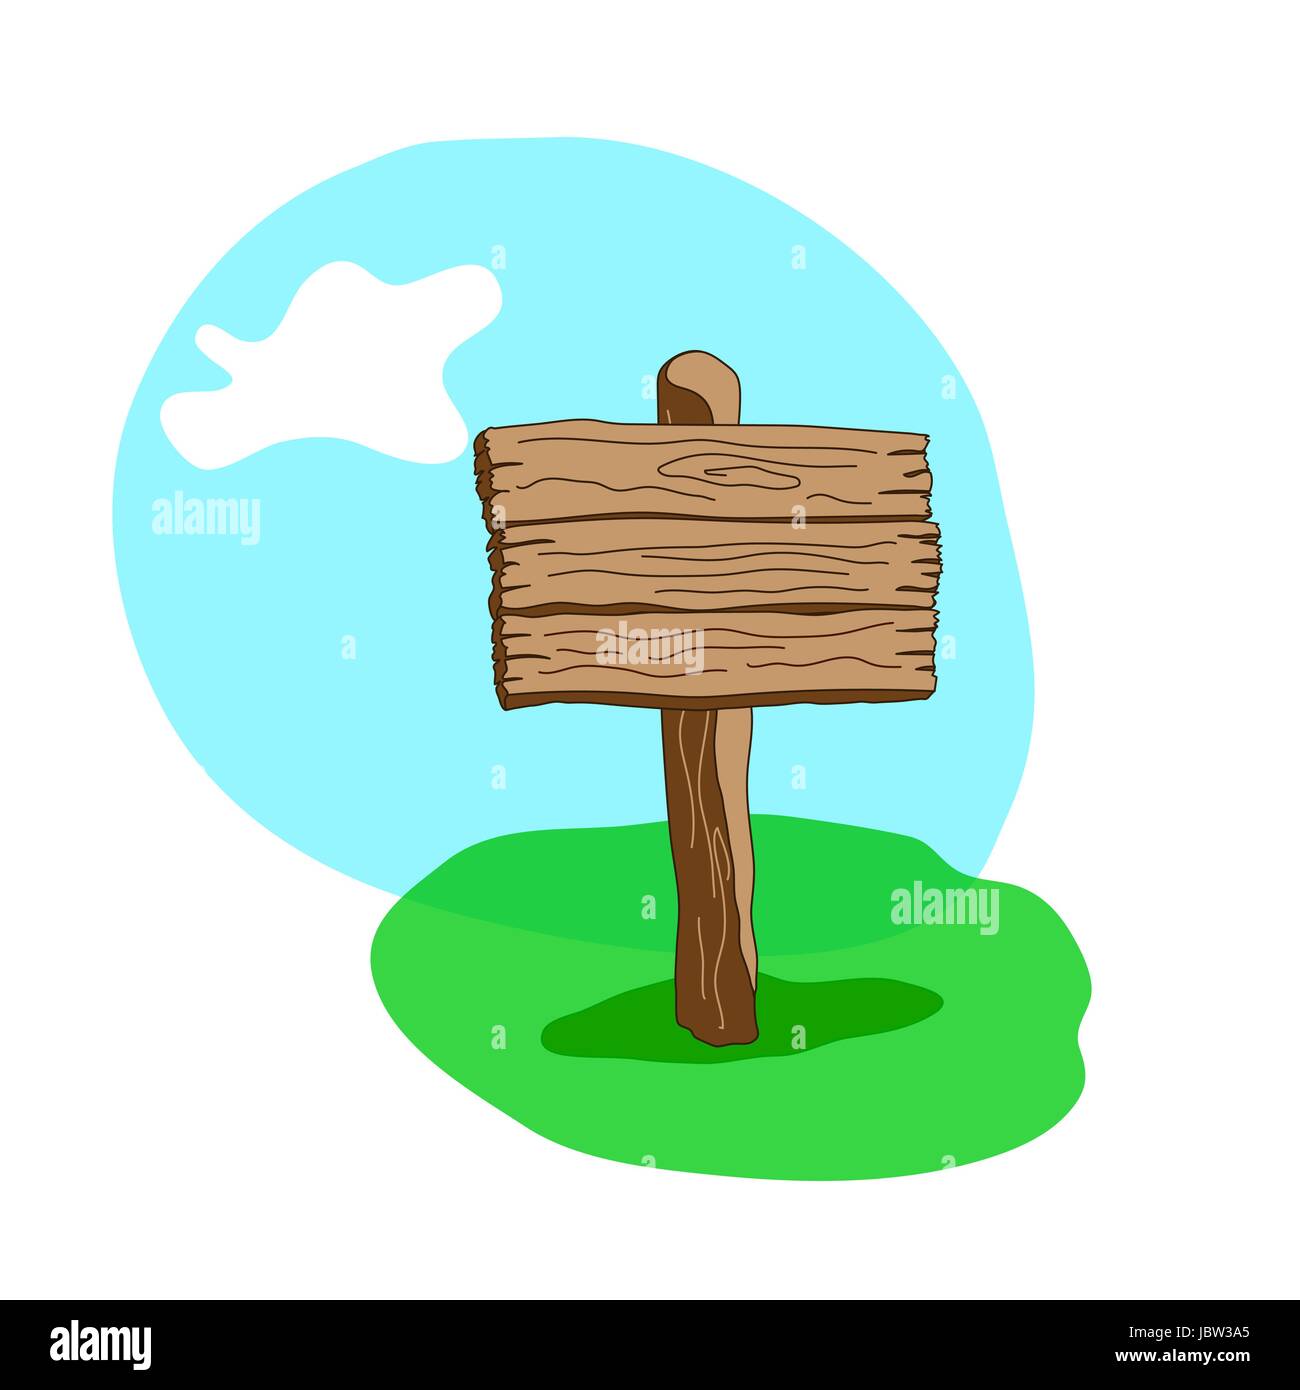 Cartoon style vector wooden sign standing in grass. Square shape signpost Stock Vector